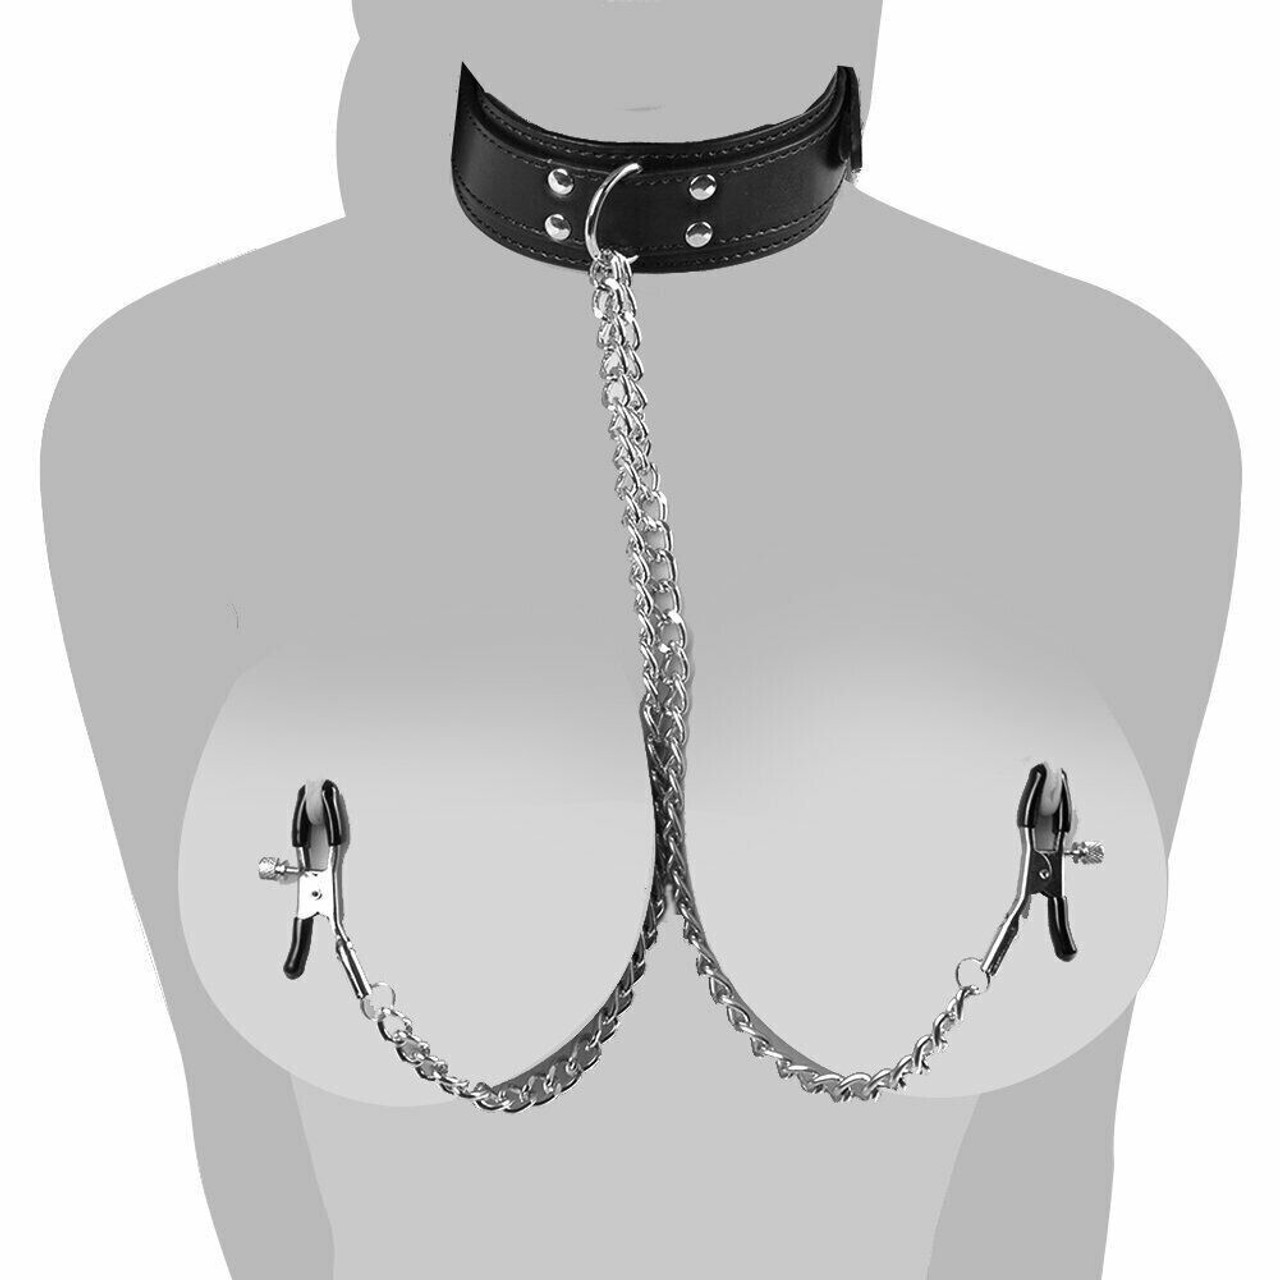 PU Leather Collar With Nipple Clamps SM Bondage Play Sex Toys For Couples BDSM